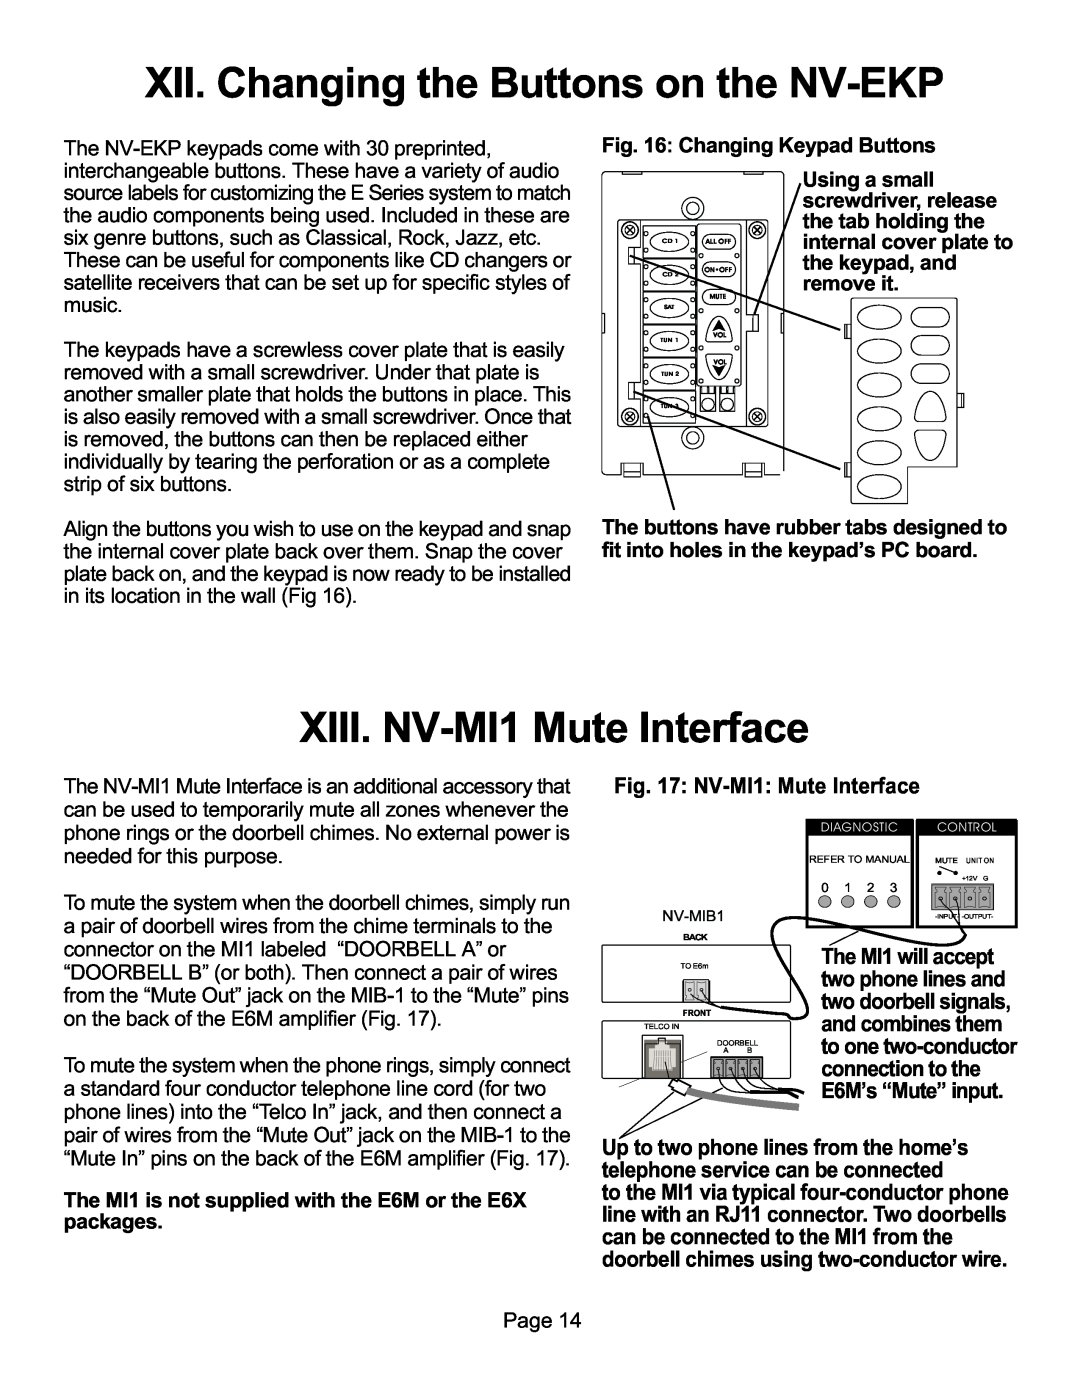 Nuvo NV-E6MS, NV-E6XS manual XII. Changing the Buttons on the NV-EKP, XIII. NV-MI1Mute Interface, NV-MI1 Mute Interface 